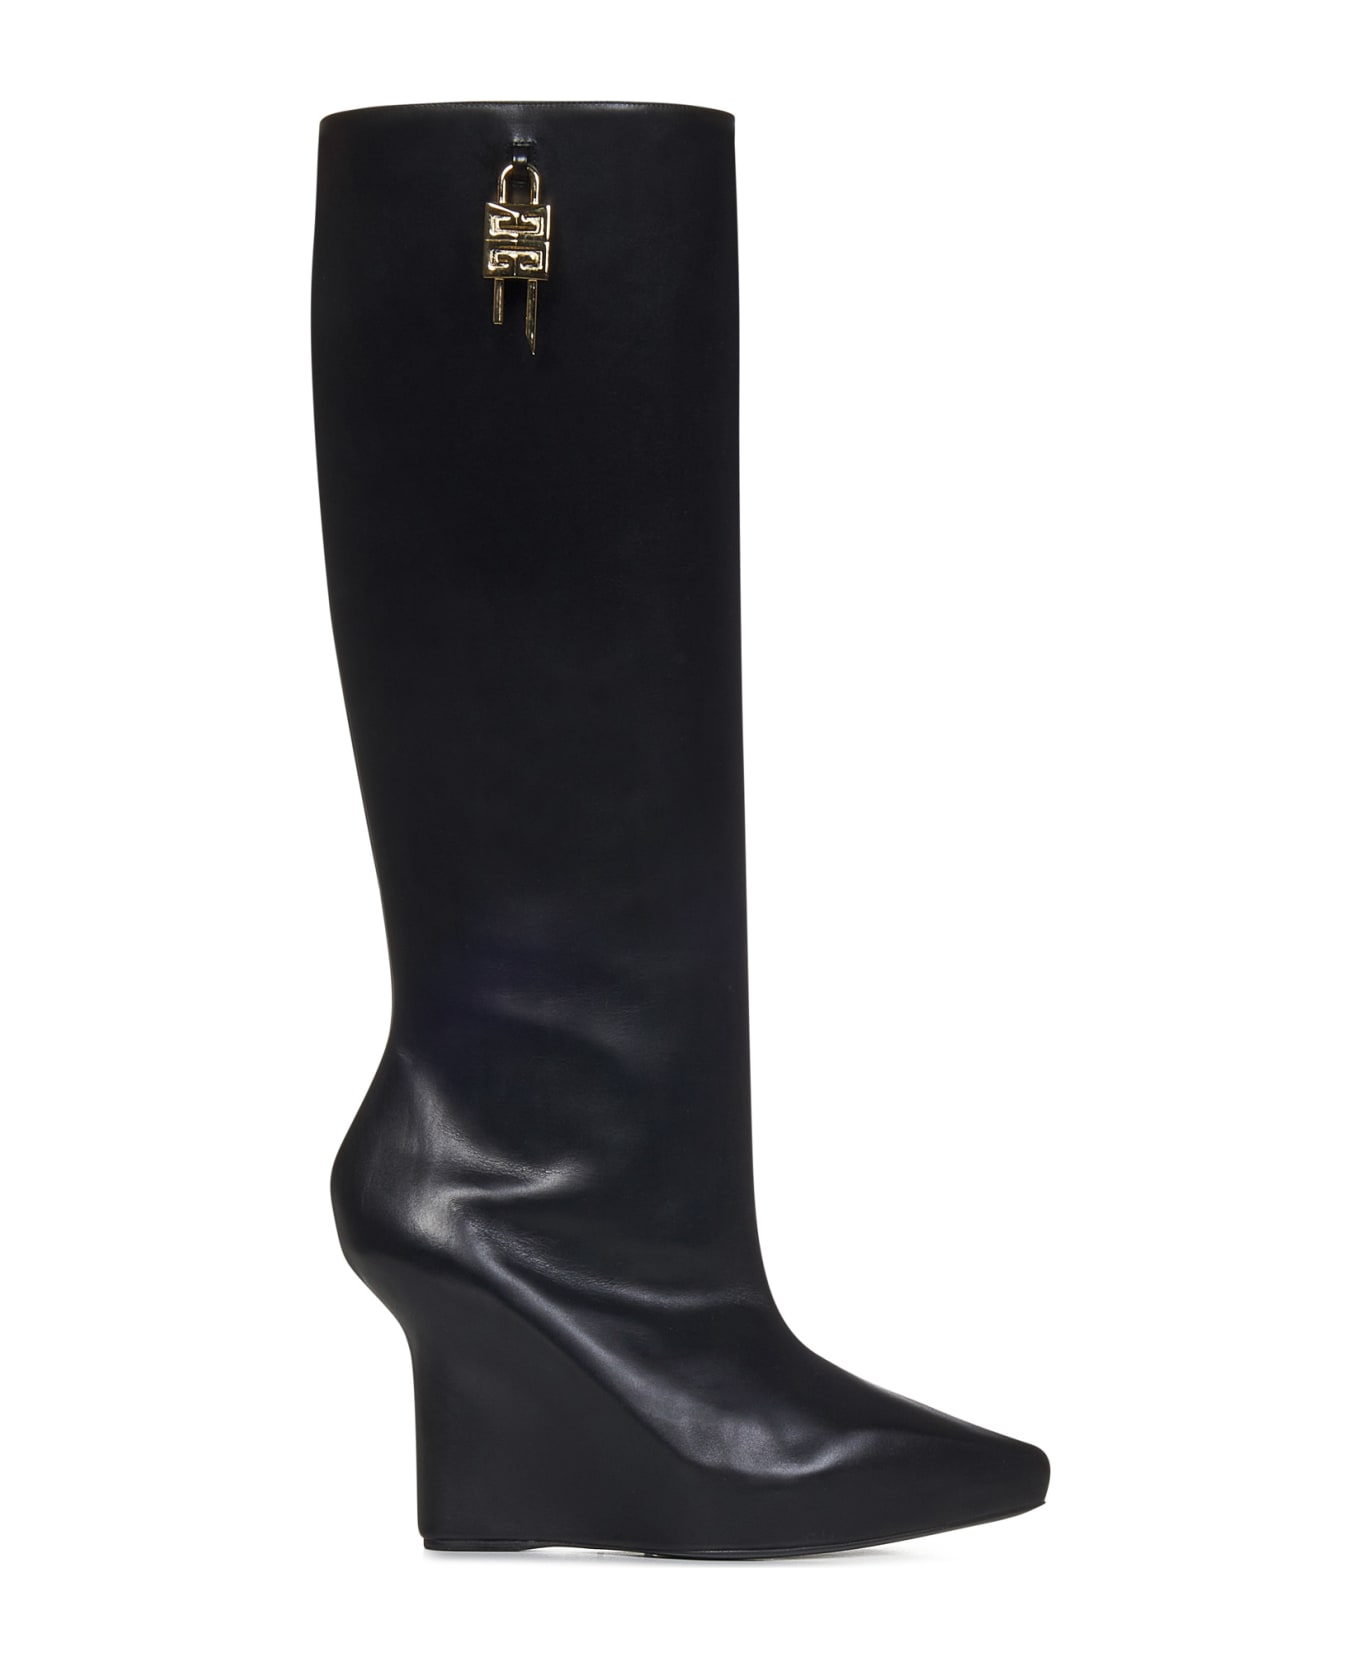 Givenchy G-lock Leather Boots - Black ブーツ